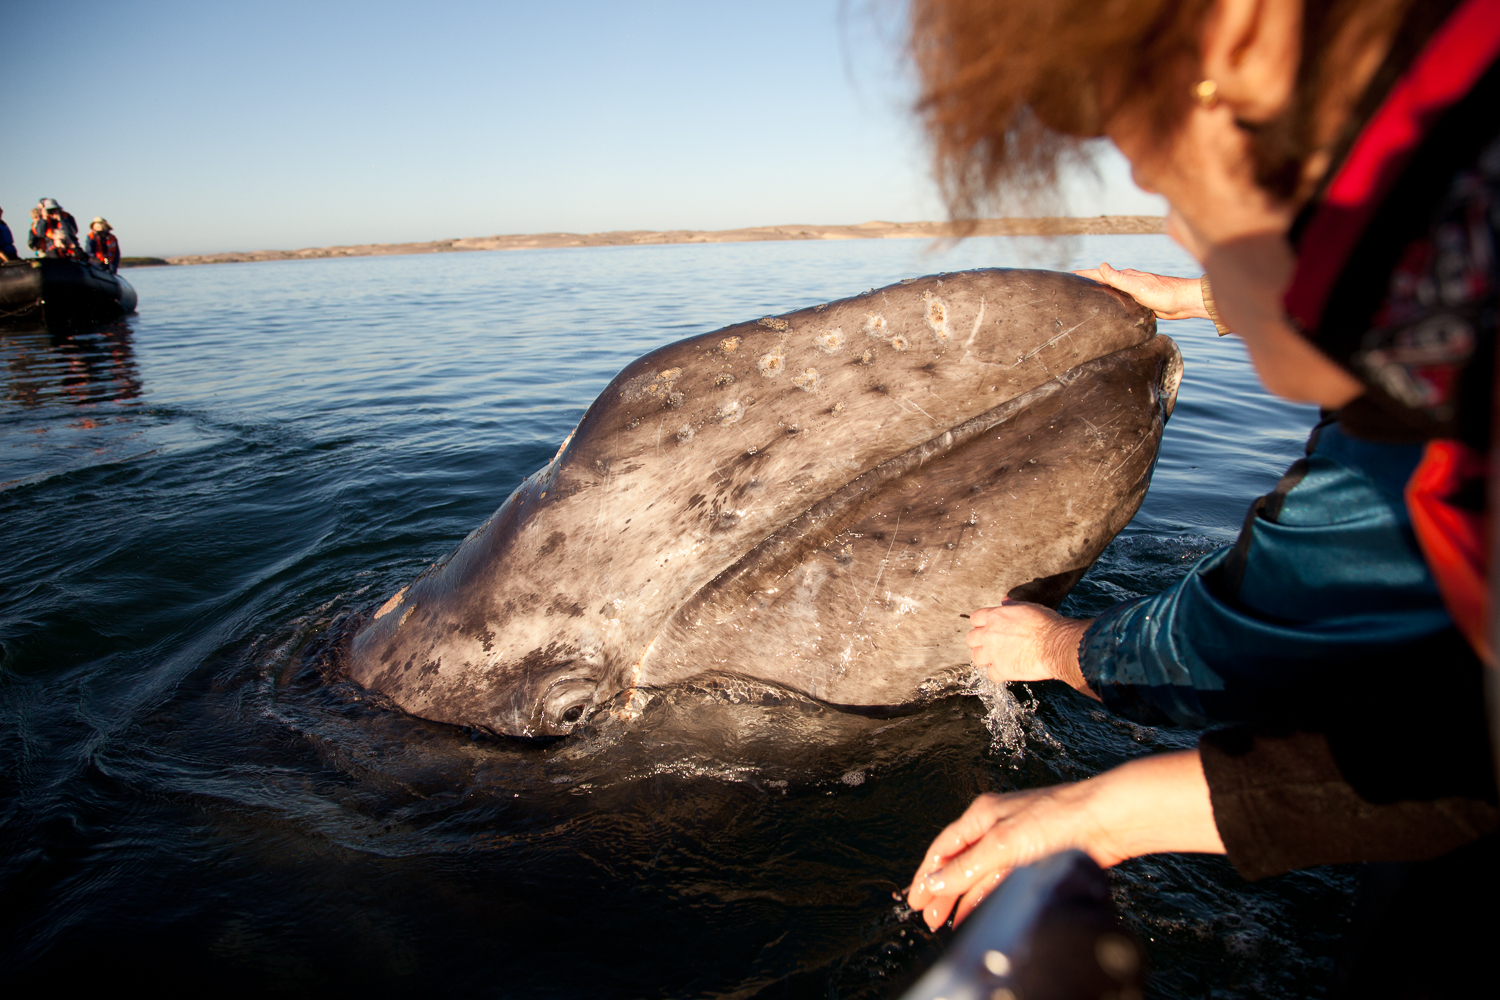 The sad, smelly story behind a beloved gray whale skeleton in Long